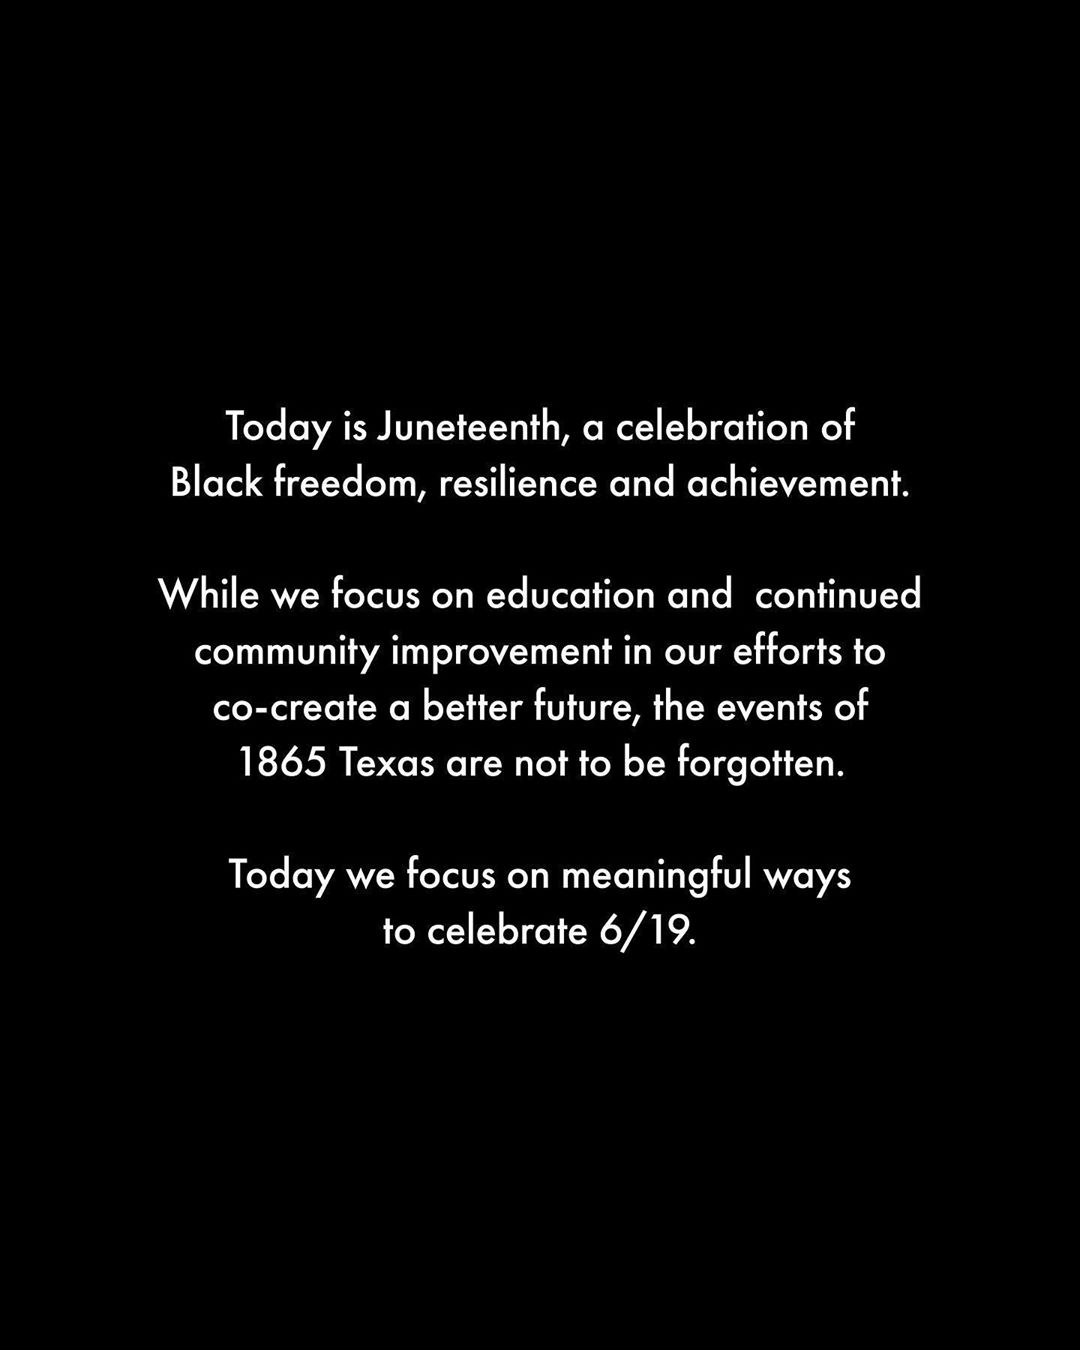 GUESS - Juneteenth is a holiday that commemorates the ending of slavery in the United States in 1865. In this celebration of freedom, we remember why we continue to fight for justice and equality. We...